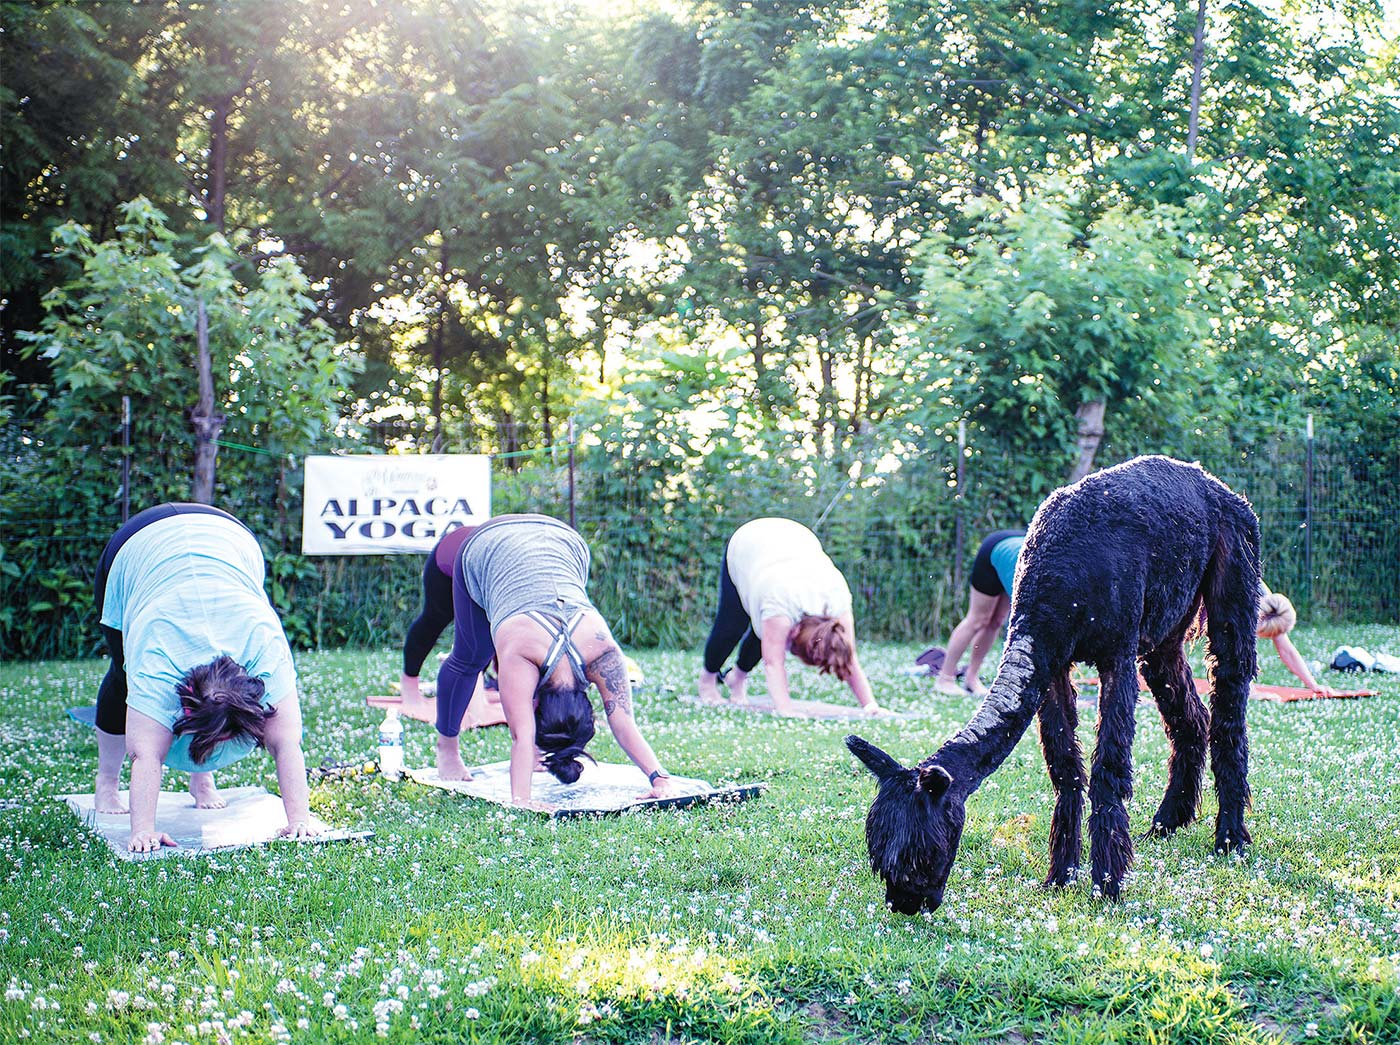 Montrose Farms hosts alpaca yoga throughout the year. Visit their website for the schedule of activities.